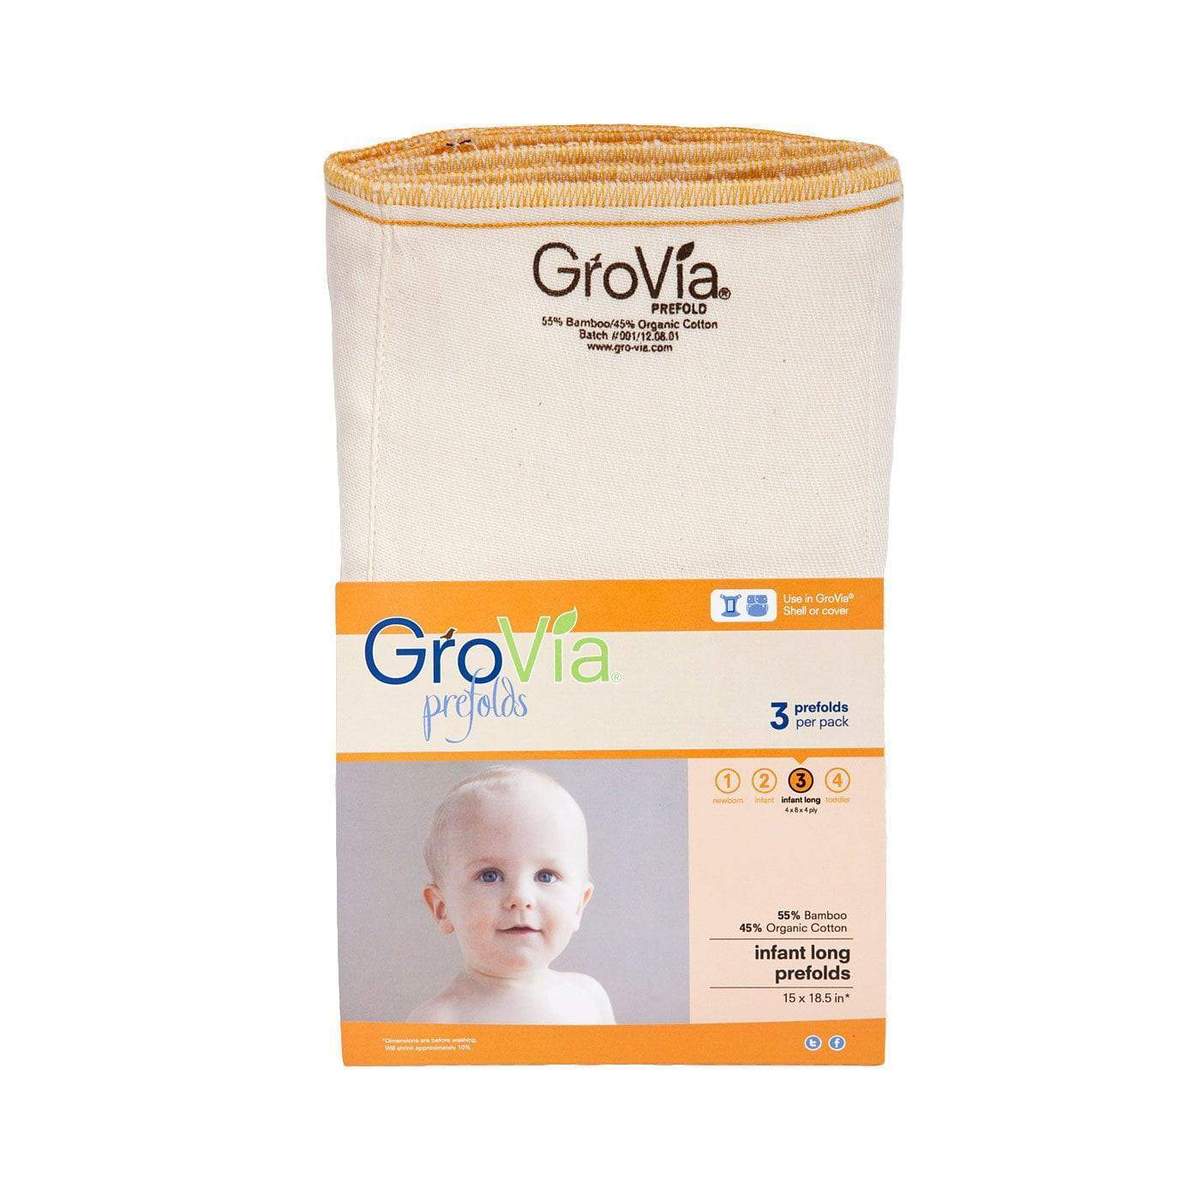 GroVia - Bamboo Prefold Cloth Diapers in a pack of 3 long infant